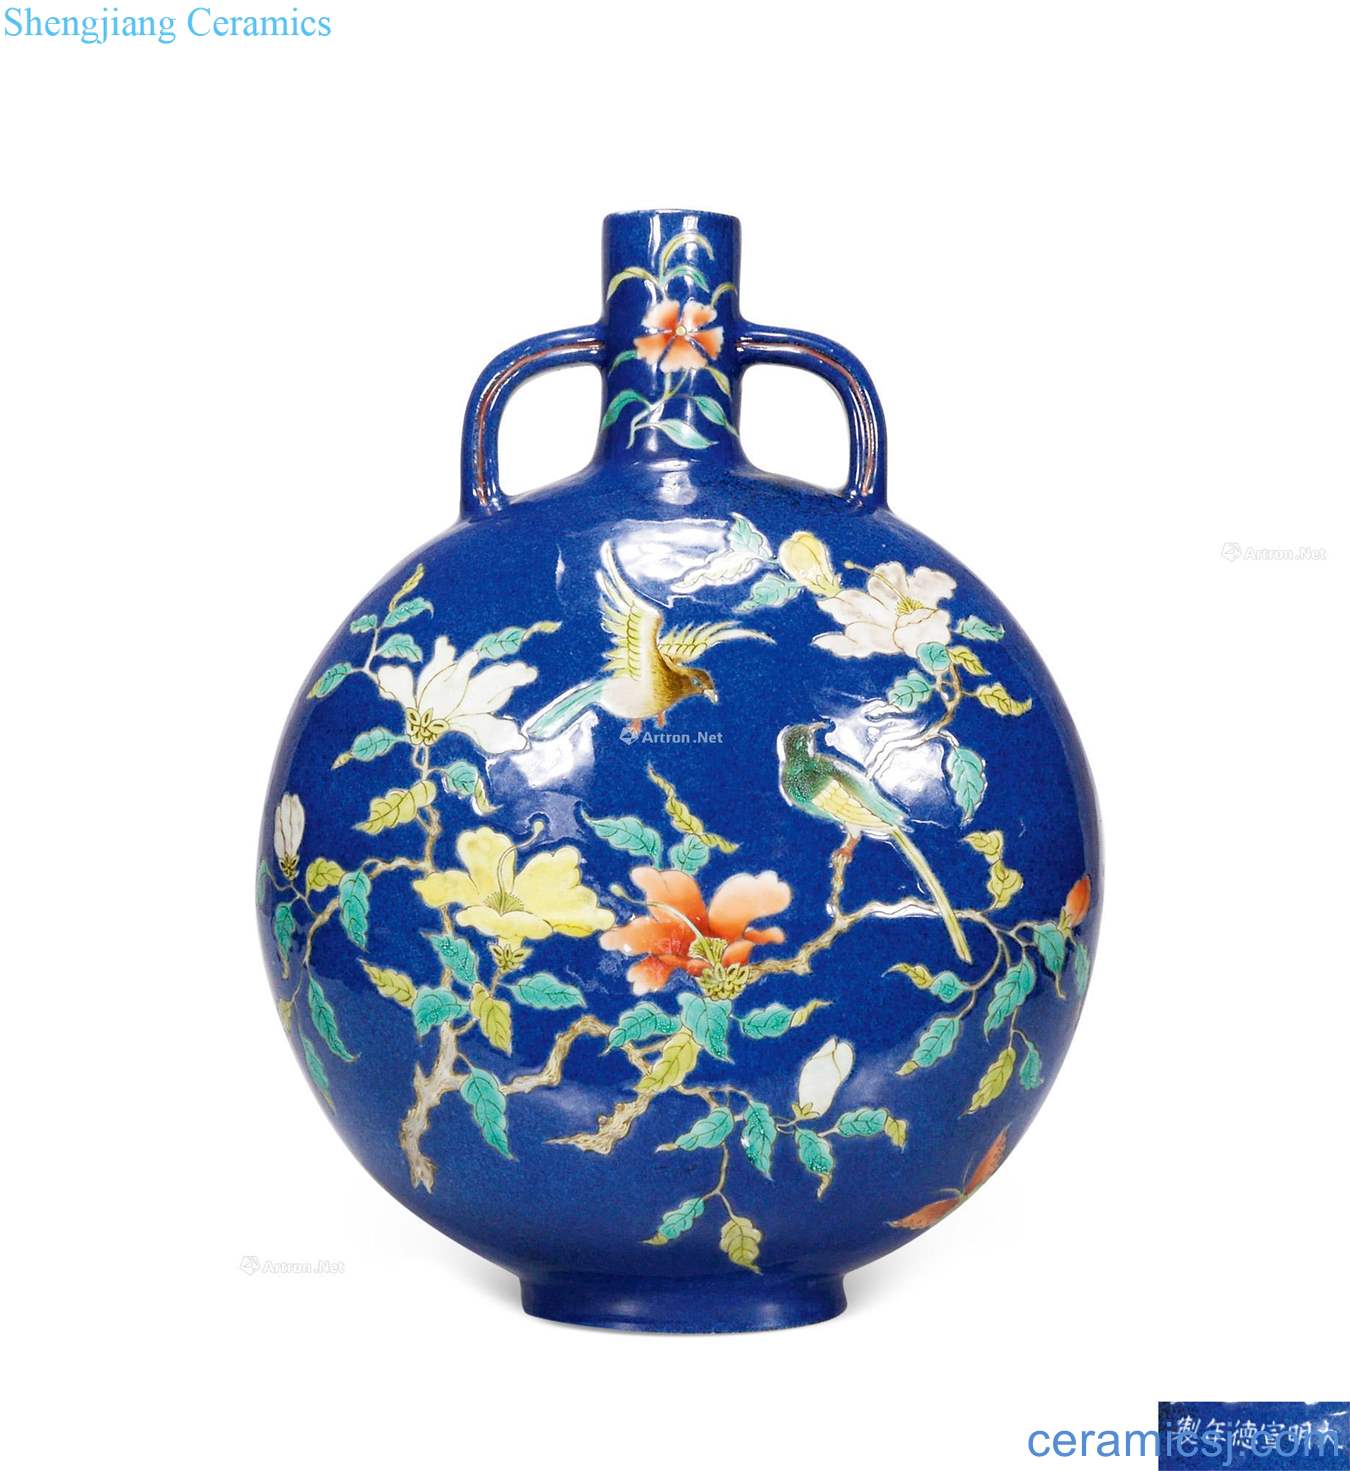 Ming xuande years The blue glaze painting of flowers and grain ears flat bottles